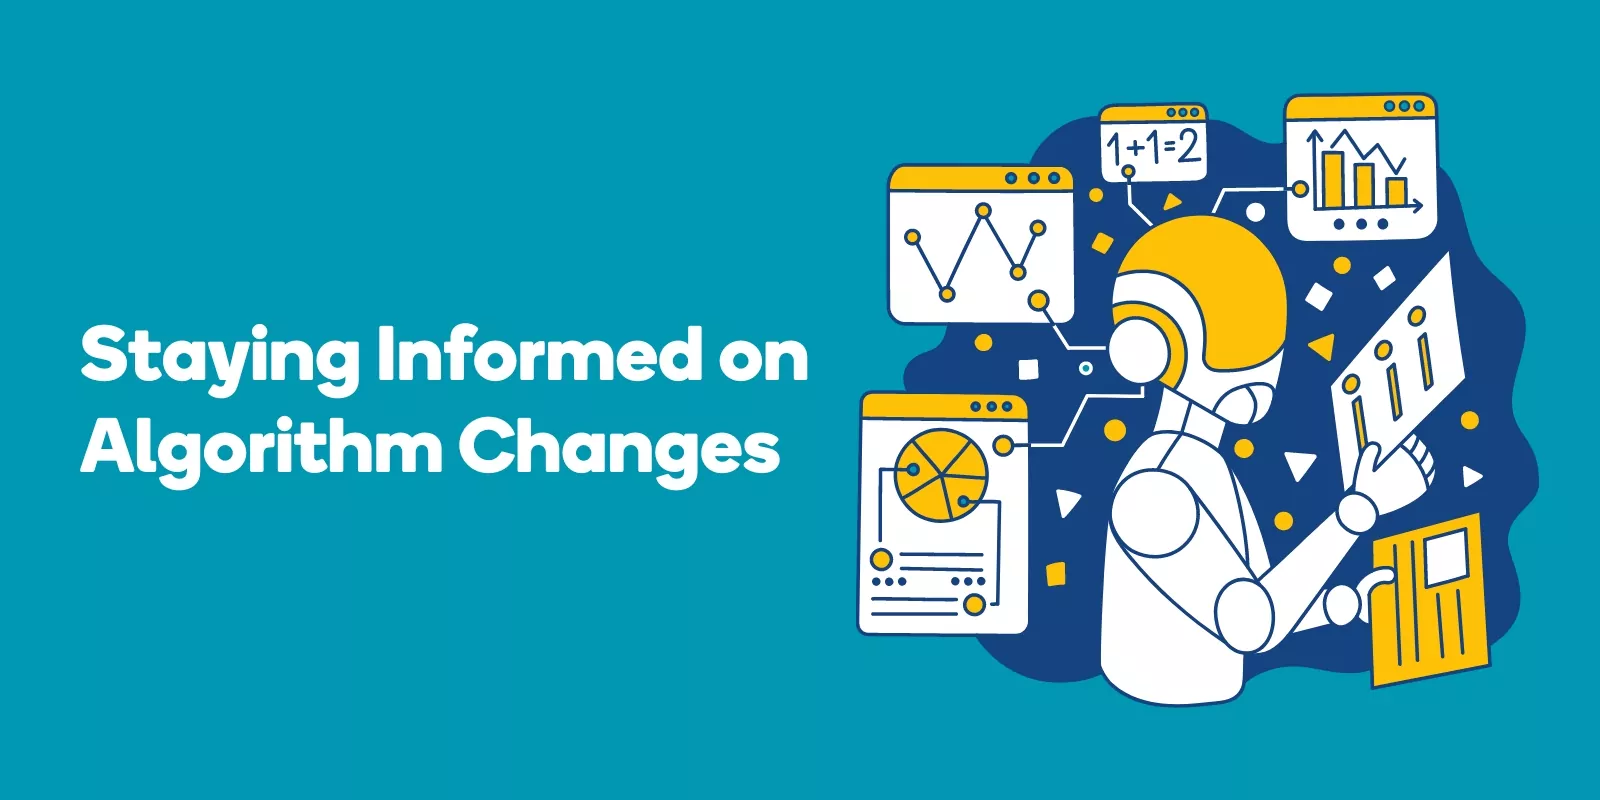 Staying Informed on Algorithm Changes